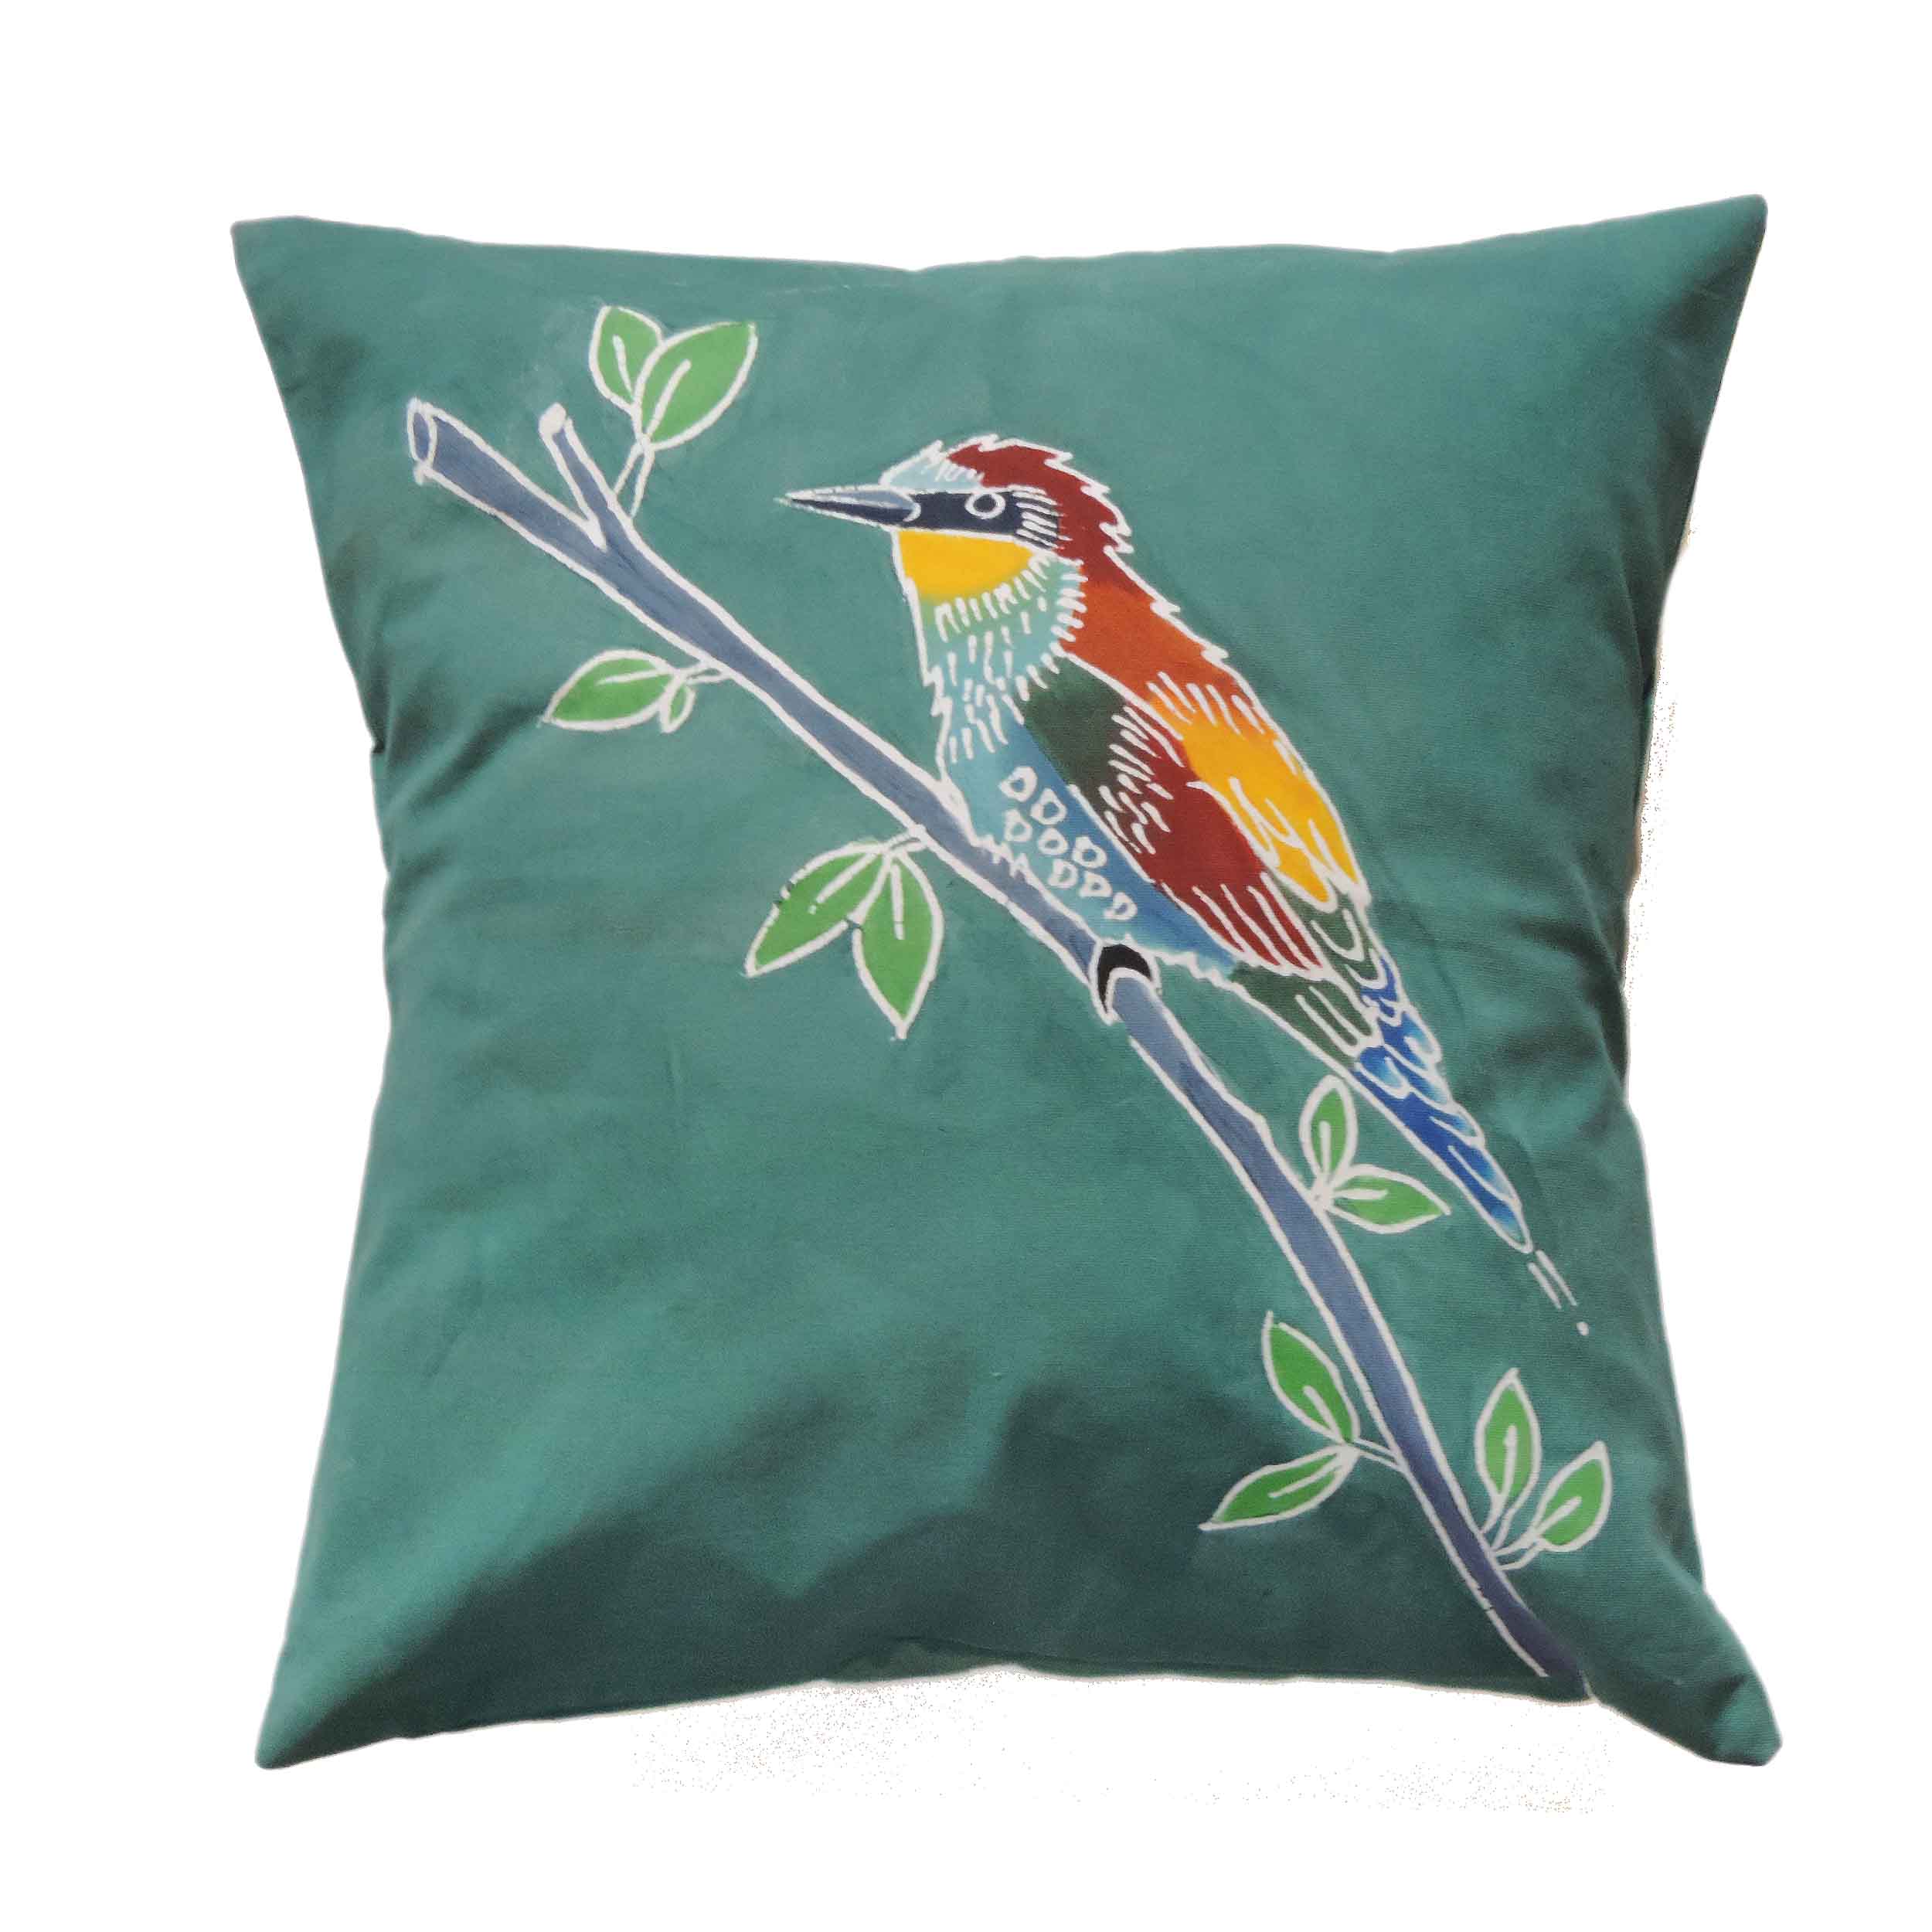 Papiko European Bee-Eater Cushion Cover - Hand Painted by TRIBAL TEXTILES - Handcrafted Home Decor Interiors - African Made